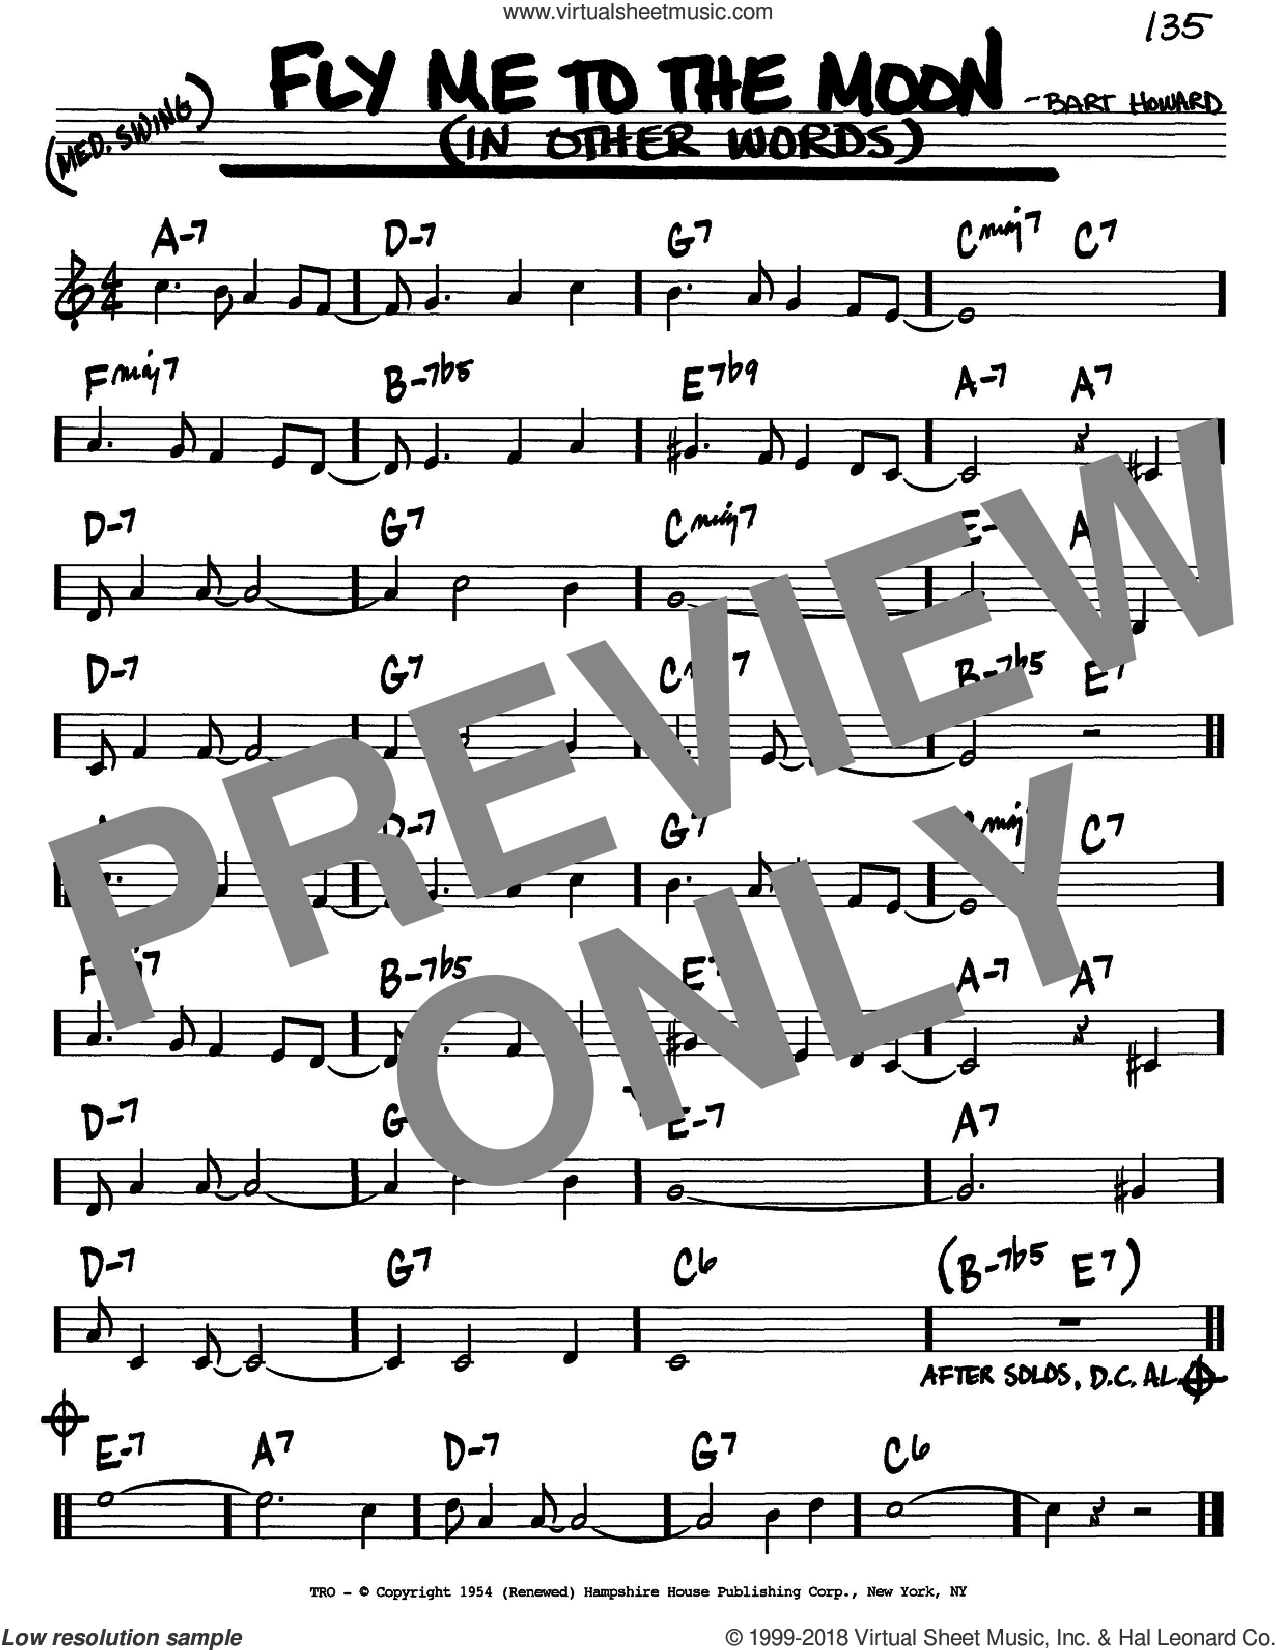 Fly Me To The Moon Chords Sinatra Fly Me To The Moon In Other Words Sheet Music Real Book Melody And Chords In C